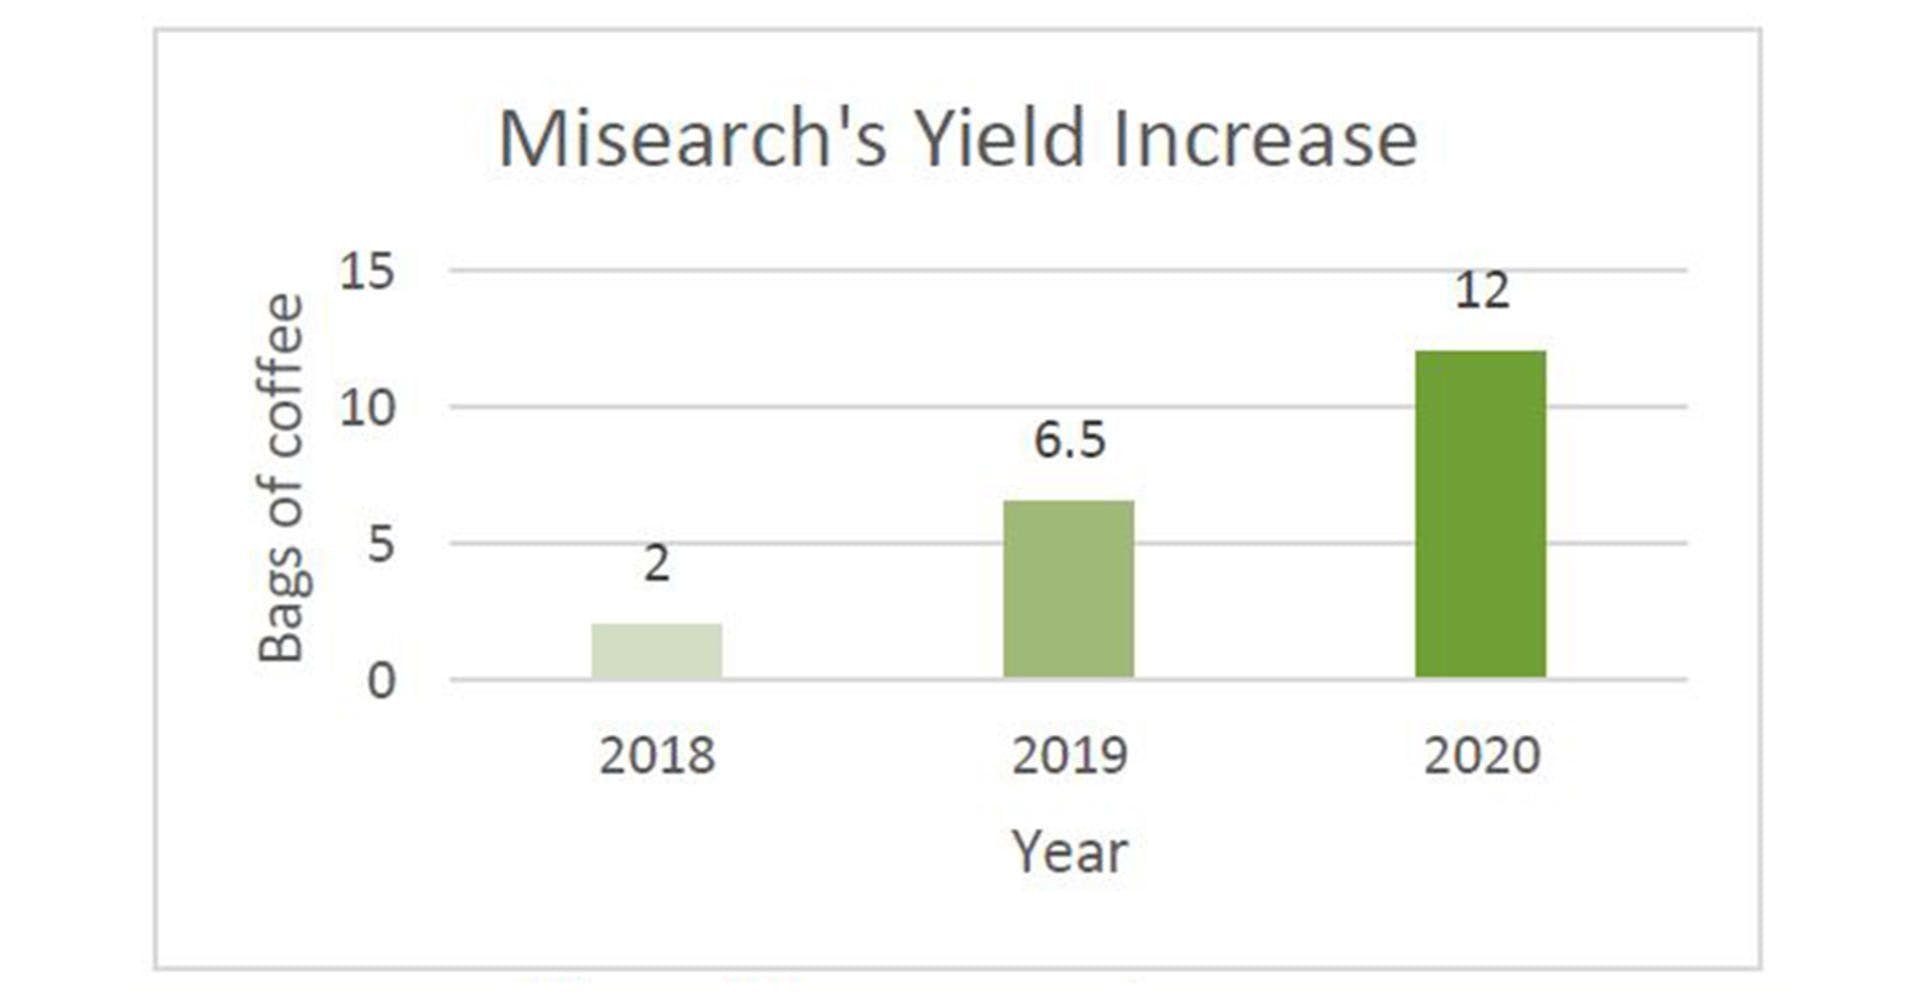 Misearch’s yield increase after joining UCAT